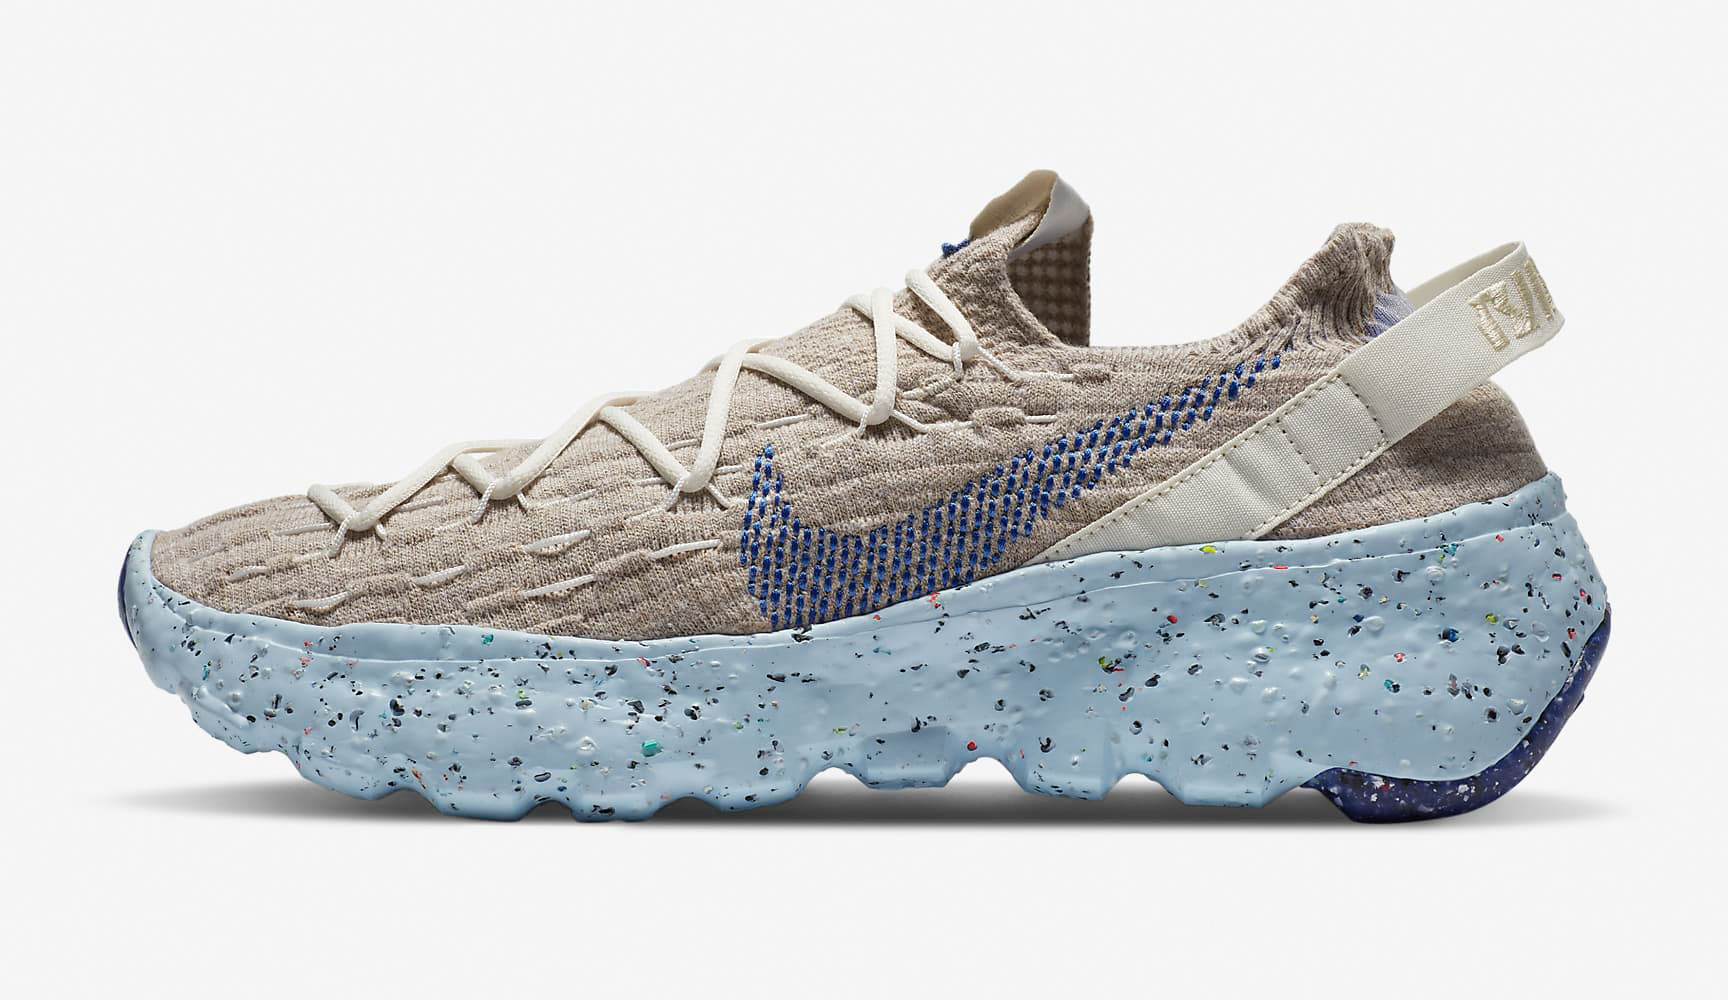 nike-space-hippie-04-sail-astronomy-blue-release-date